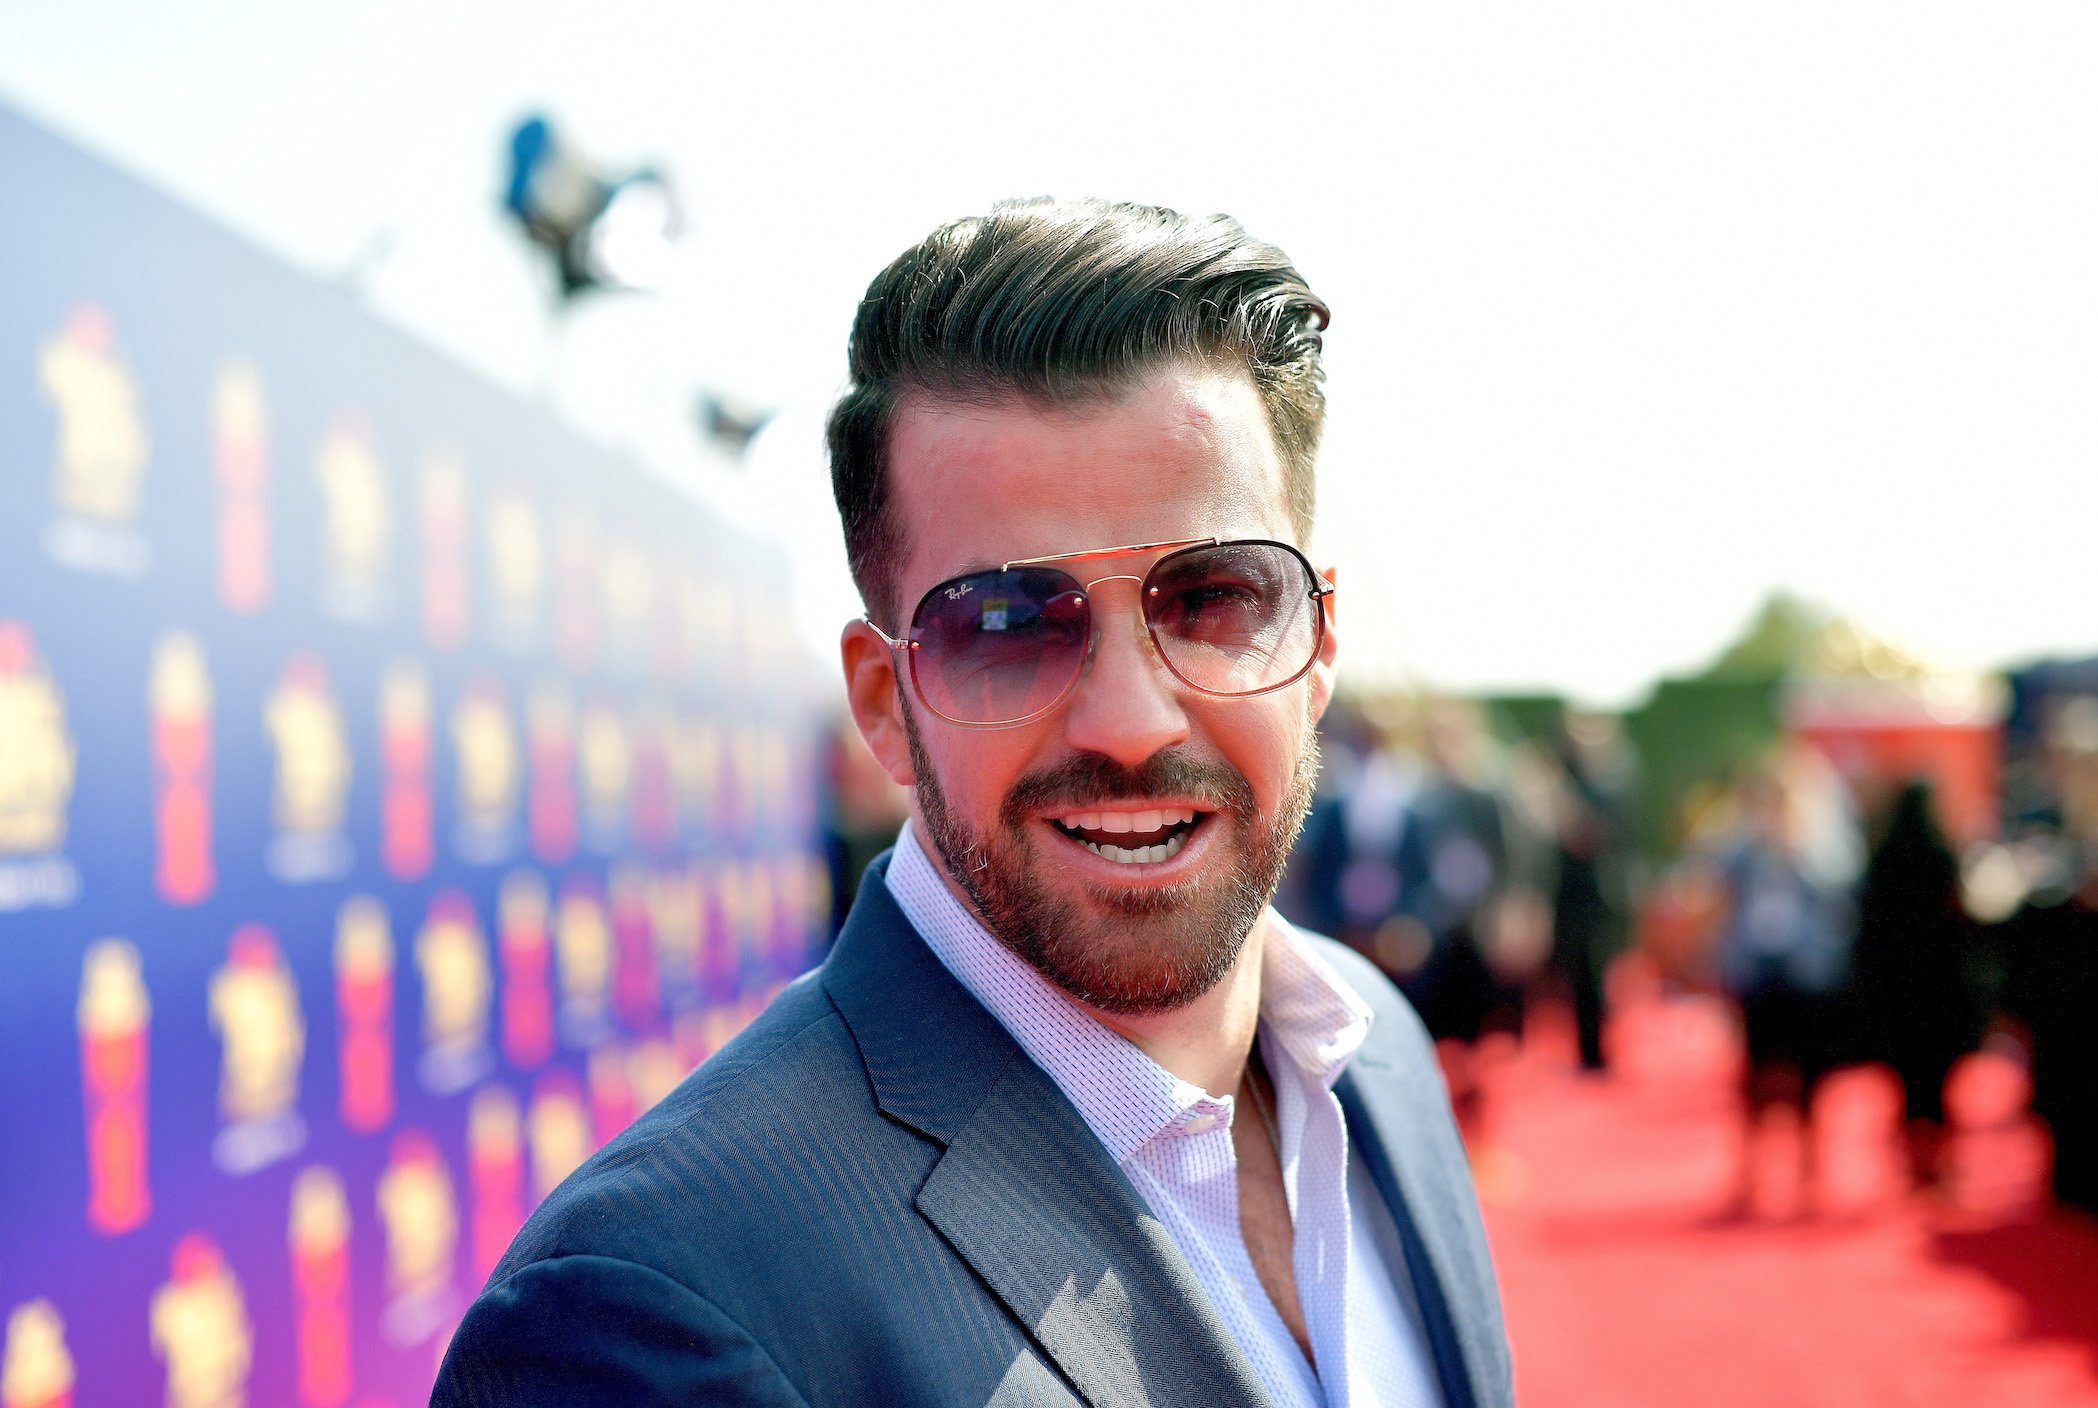 Johnny 'Bananas' Devenanzio from MTV's 'The Challenge' wearing a suit and sunglasses looking into the camera at the 2019 MTV Movie and TV Awards